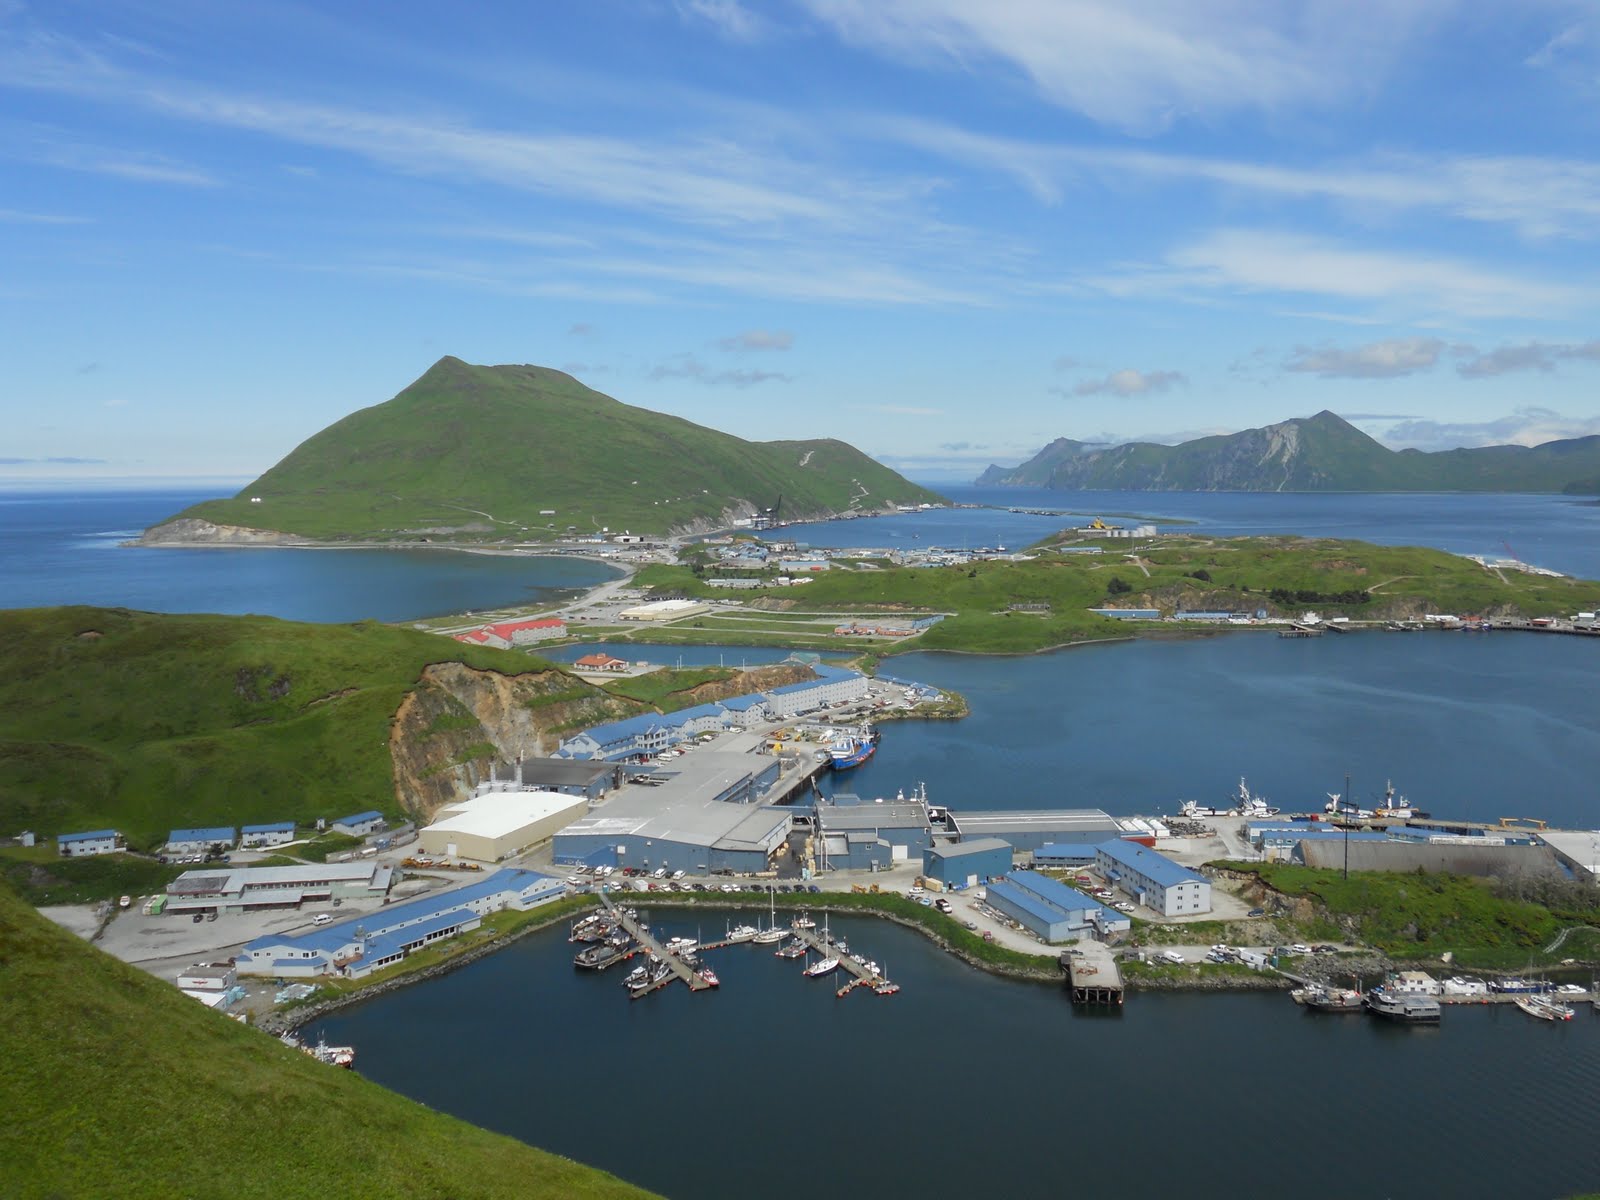 Dutch Harbor Dirt to Nome Dirt: The Beginning of a Beautiful week ...